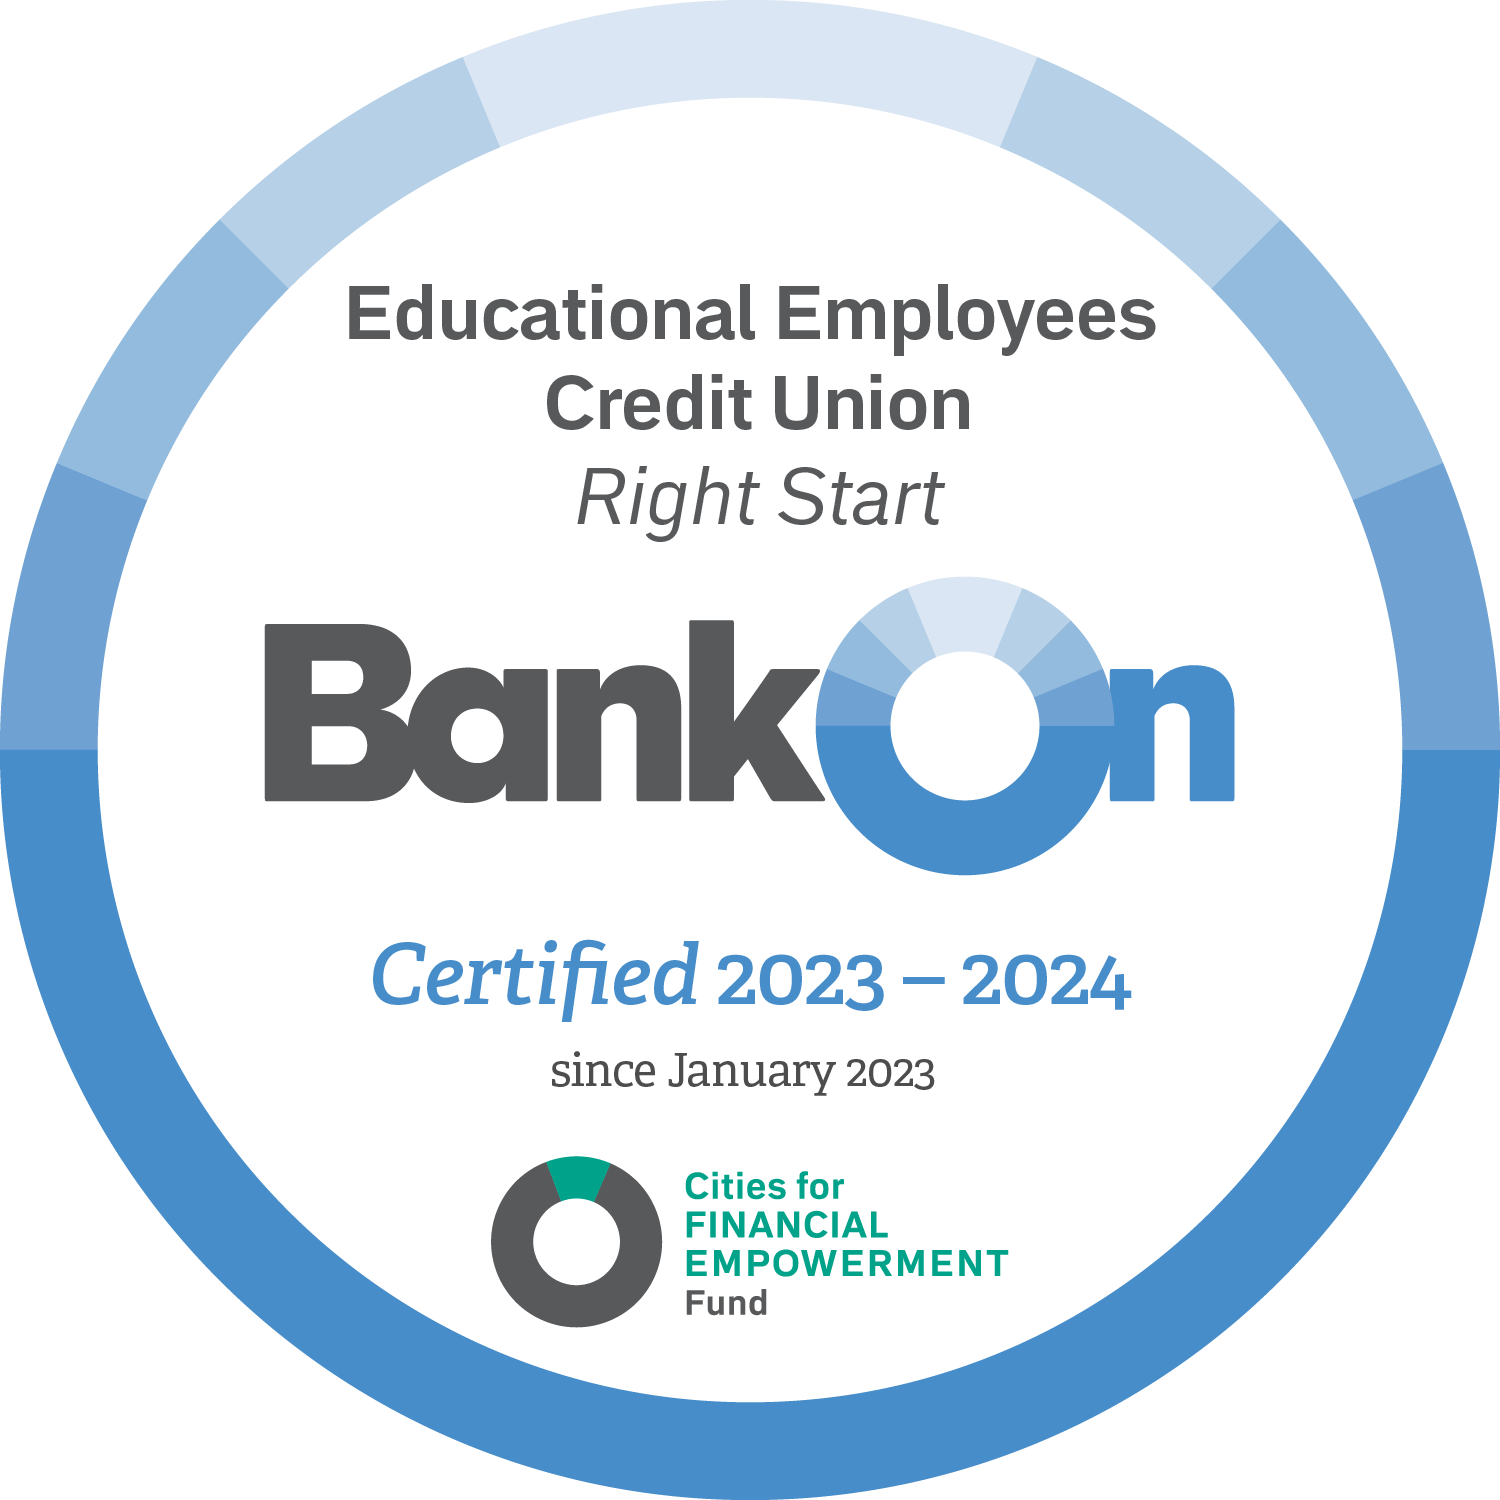 EECU Right Start, Bank On Certified 2023 to 2024, since January 2023.